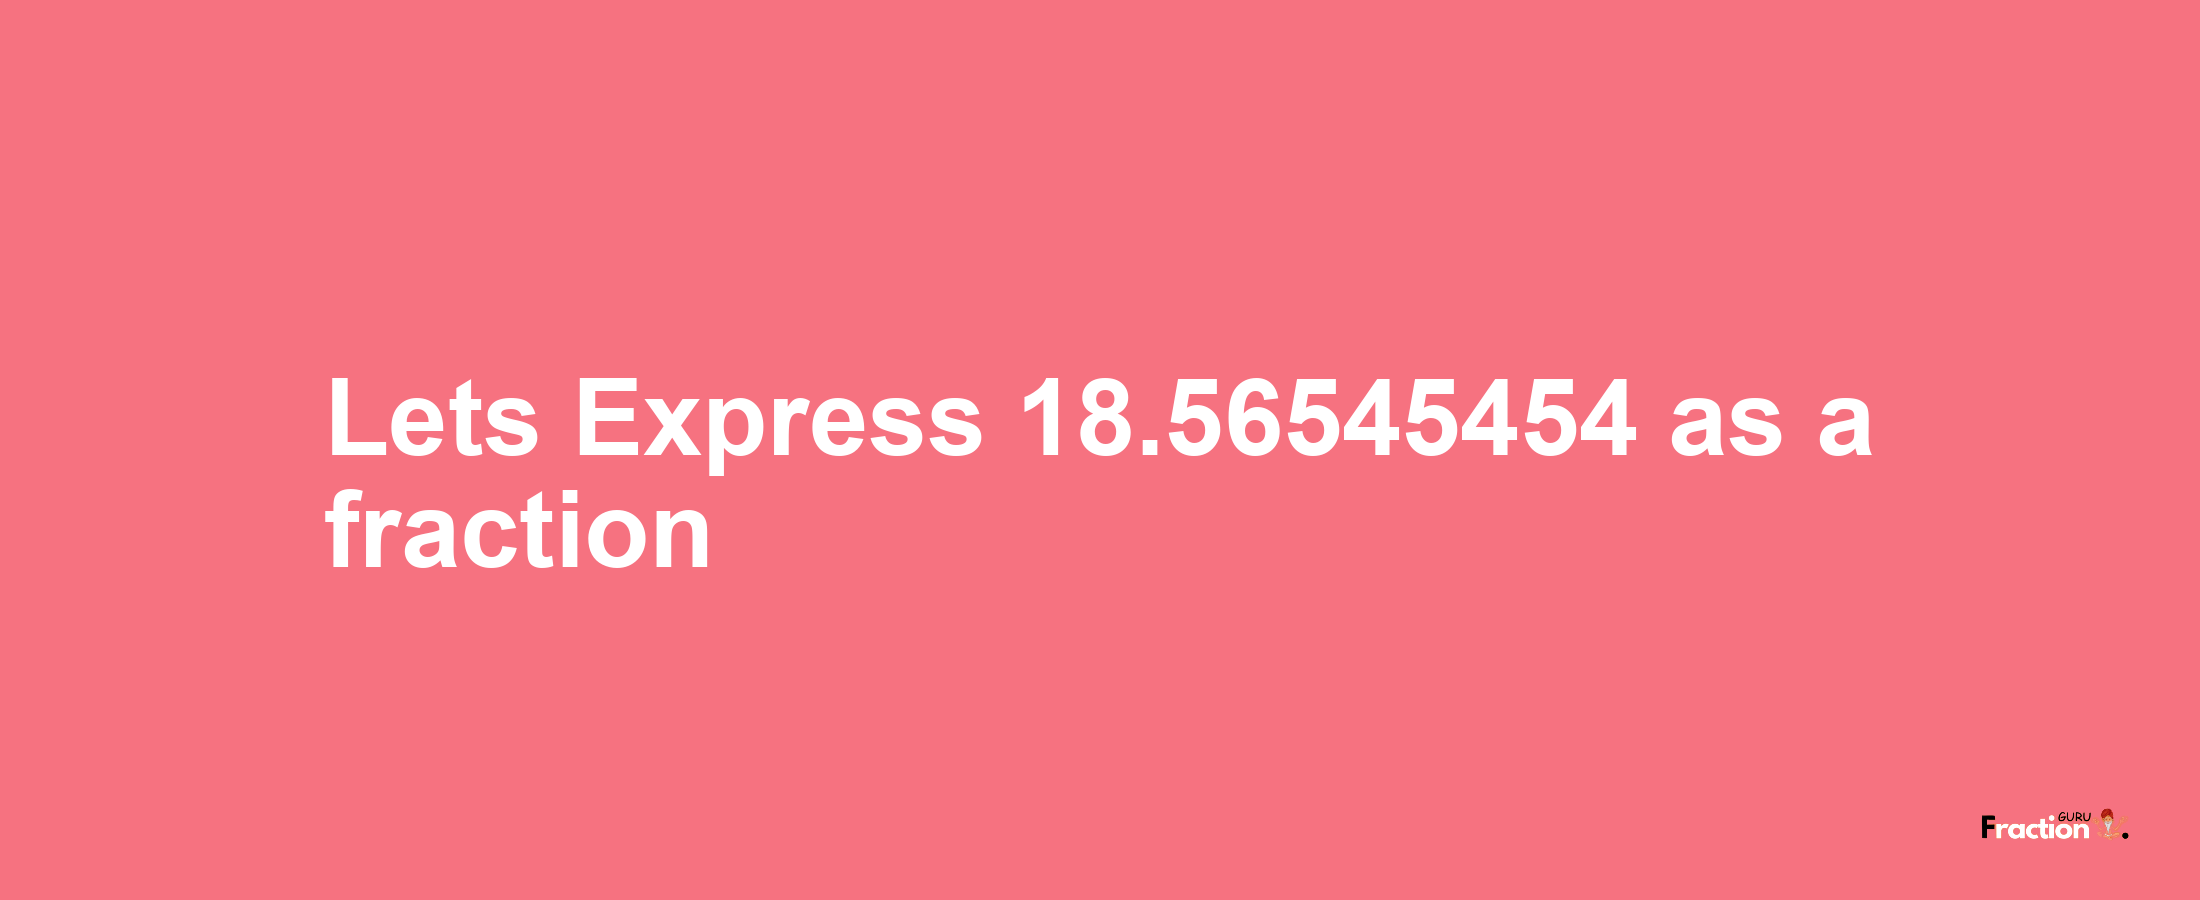 Lets Express 18.56545454 as afraction